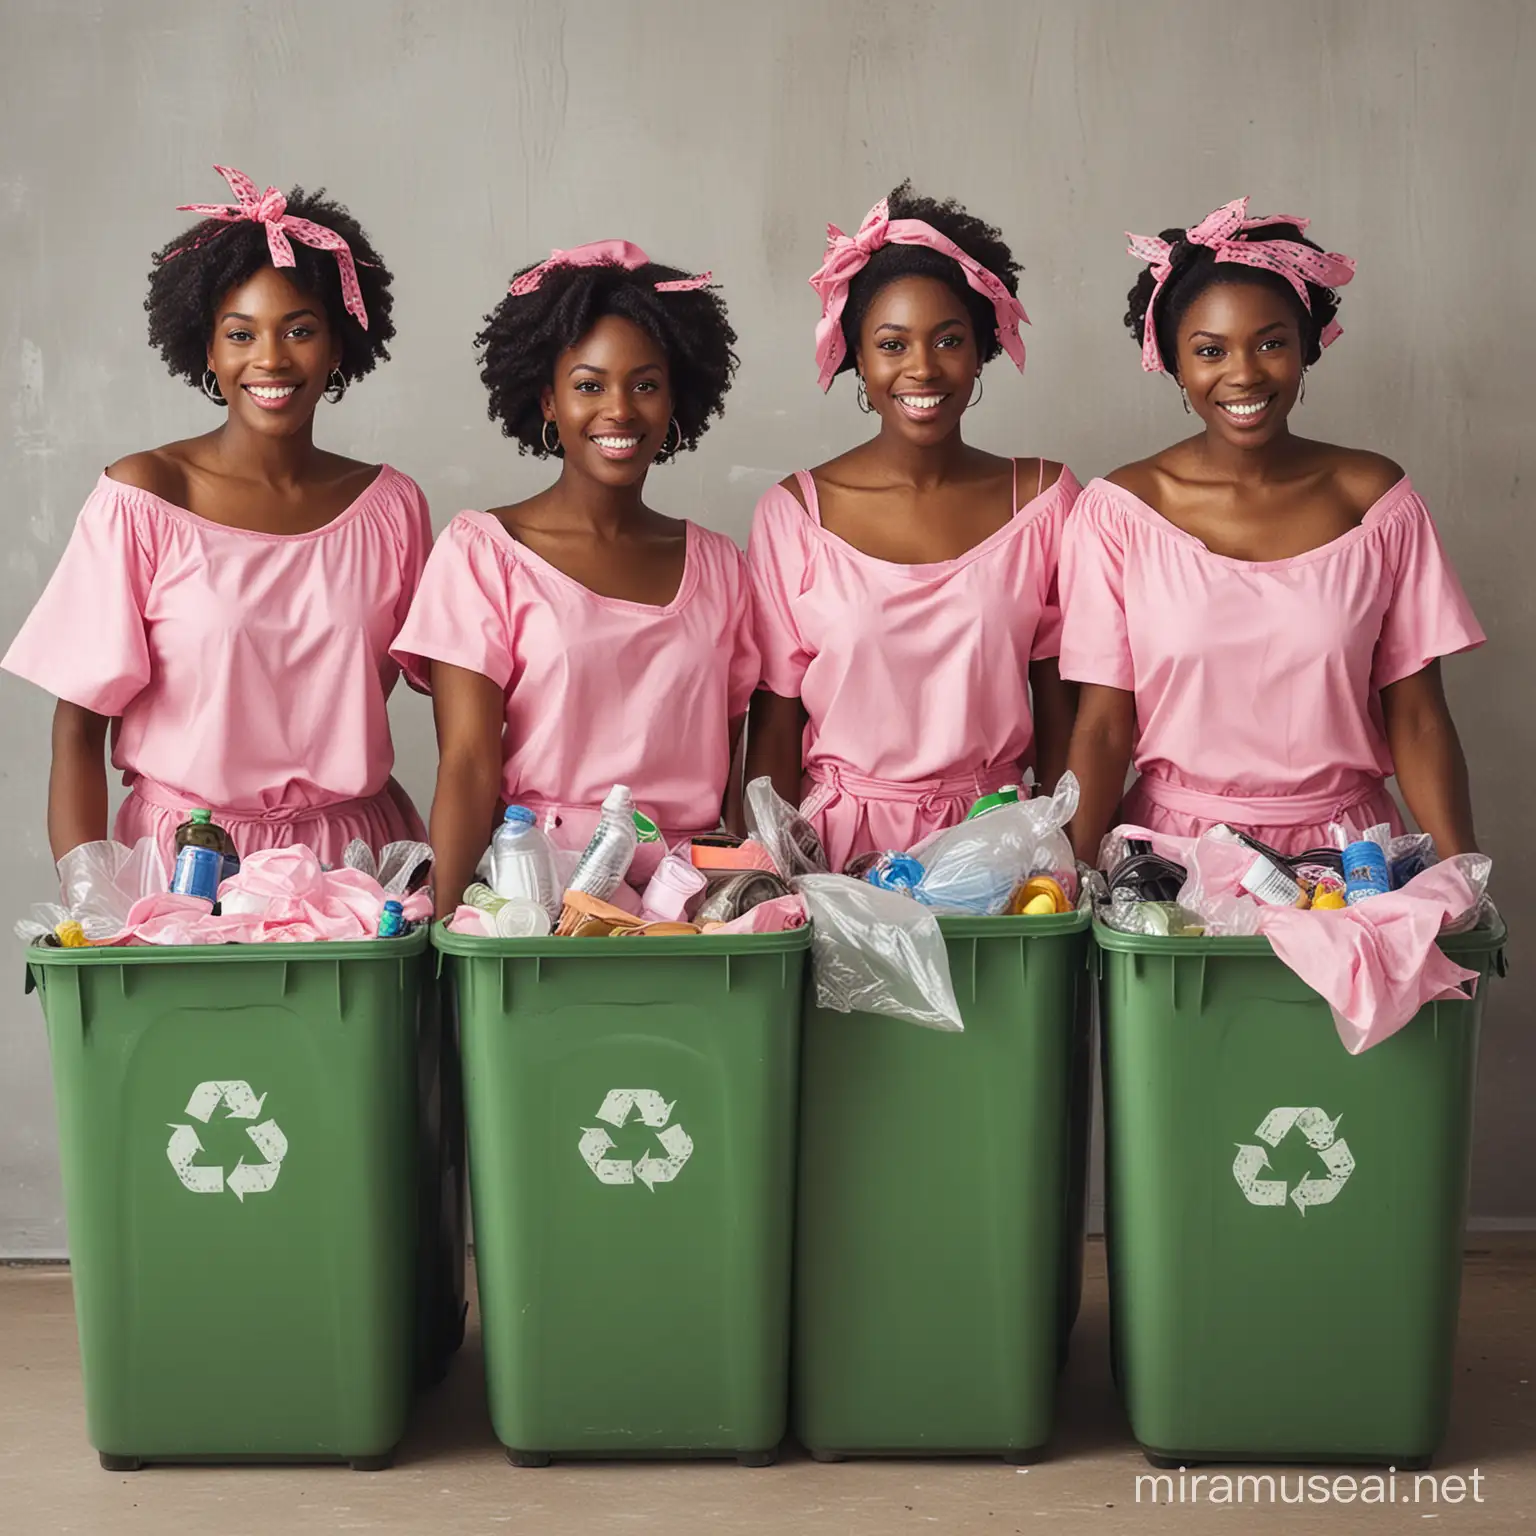 black ladies dressed in pink and green recycling